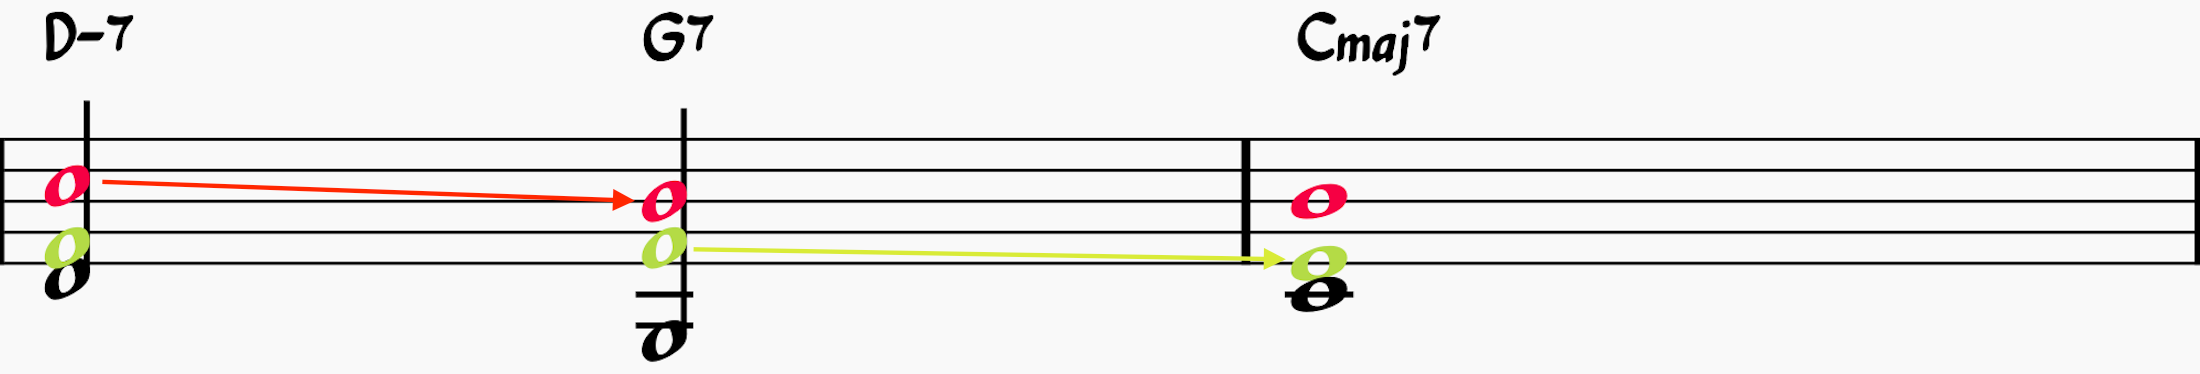 Shell-Voicings In a ii-V-I Chord Progression: